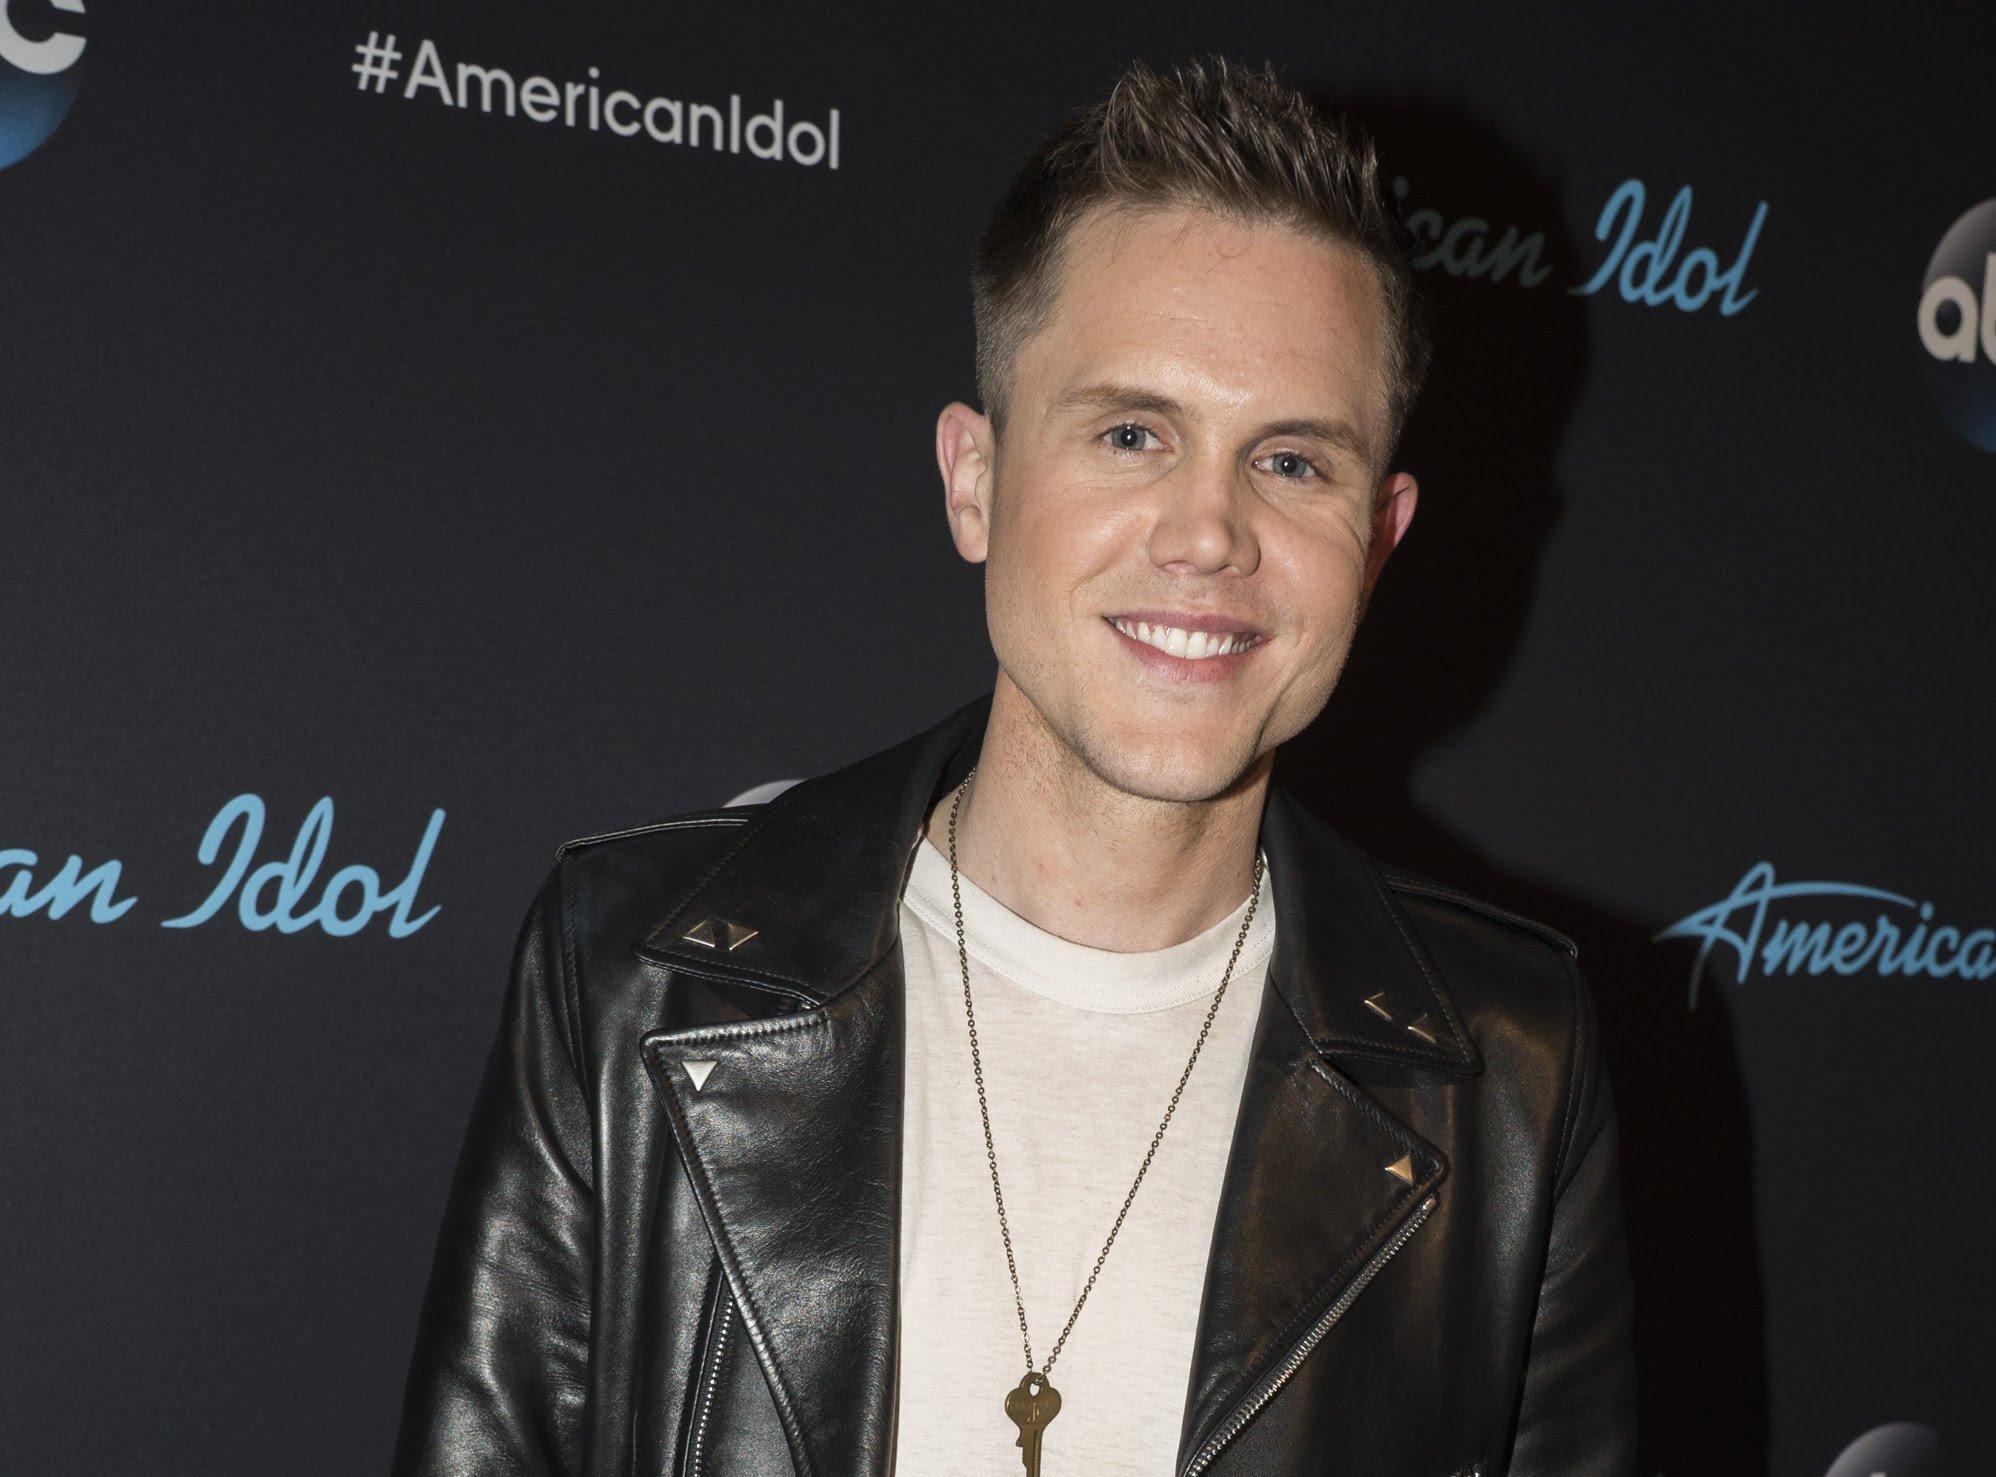 Trent Harmon Returns to American Idol to Reveal Details on Upcoming Album